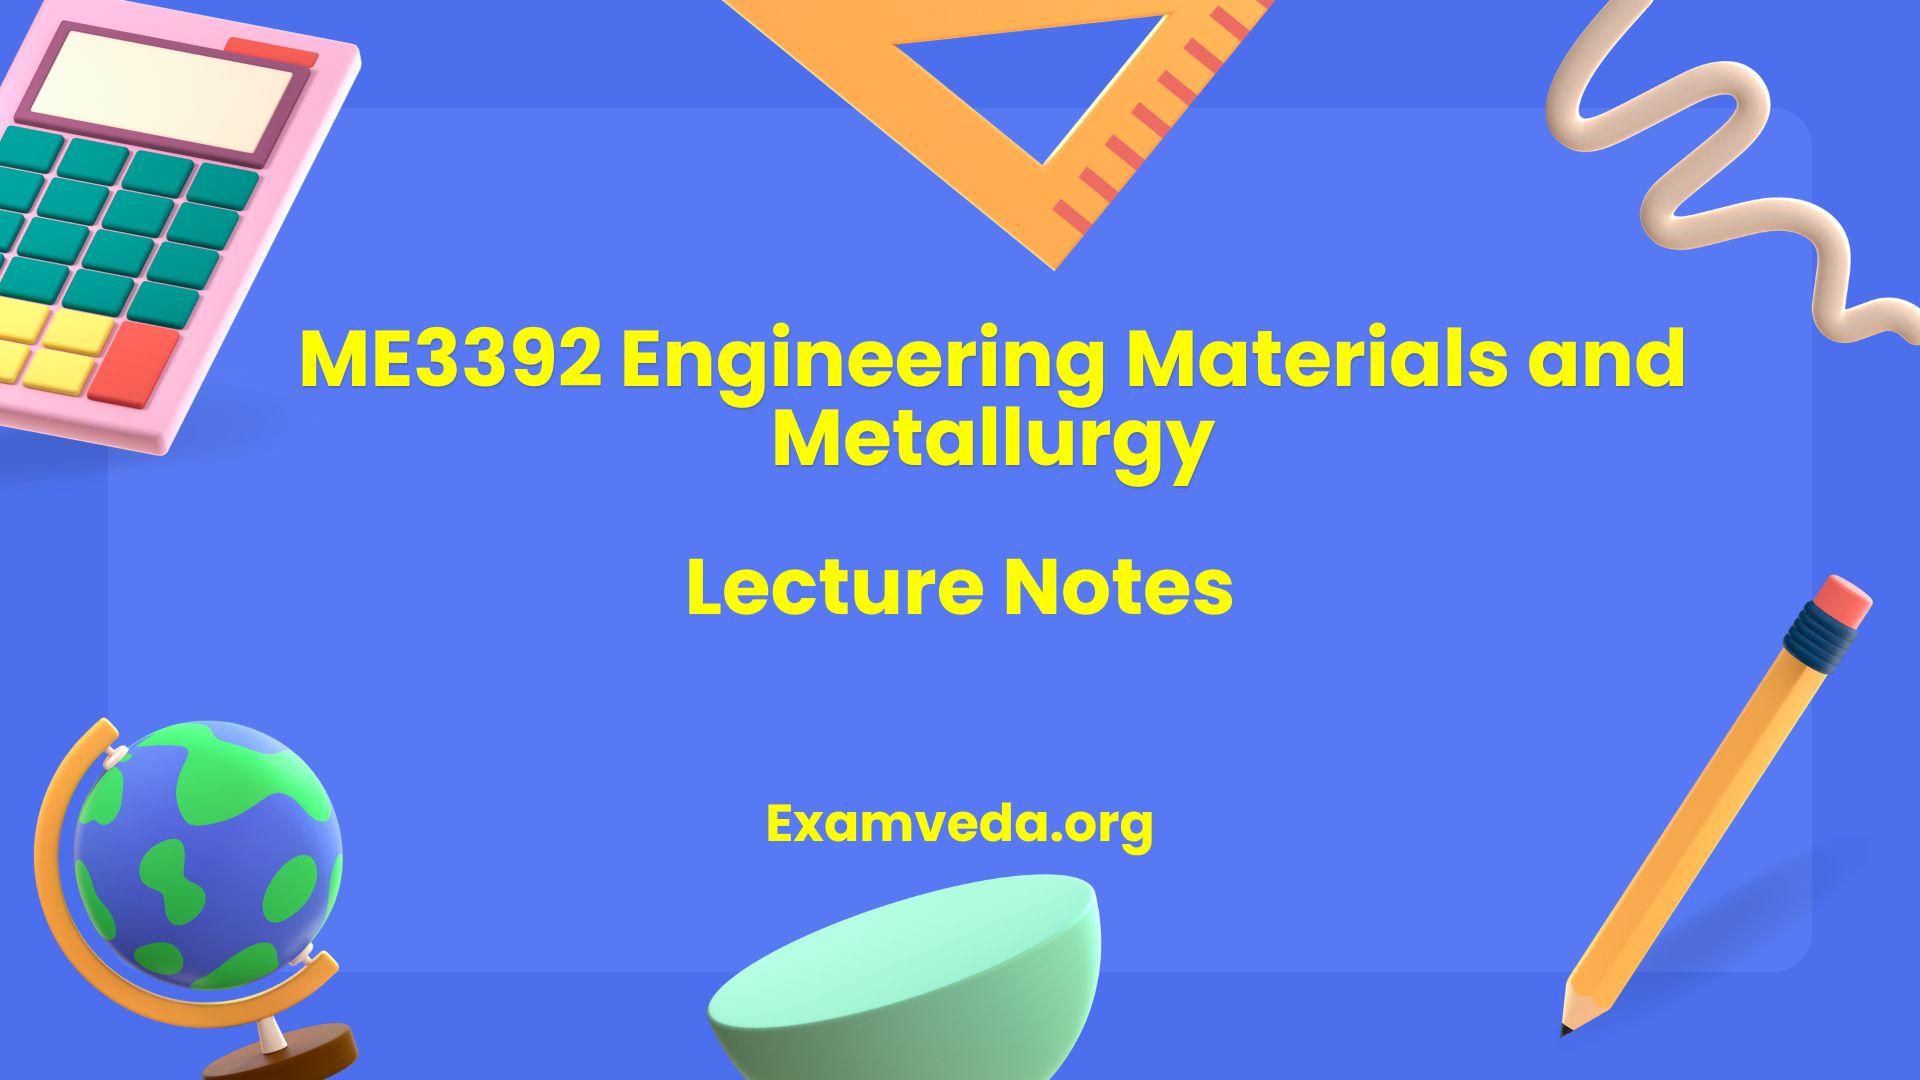 ME3392 Engineering Materials and Metallurgy Lecture Notes